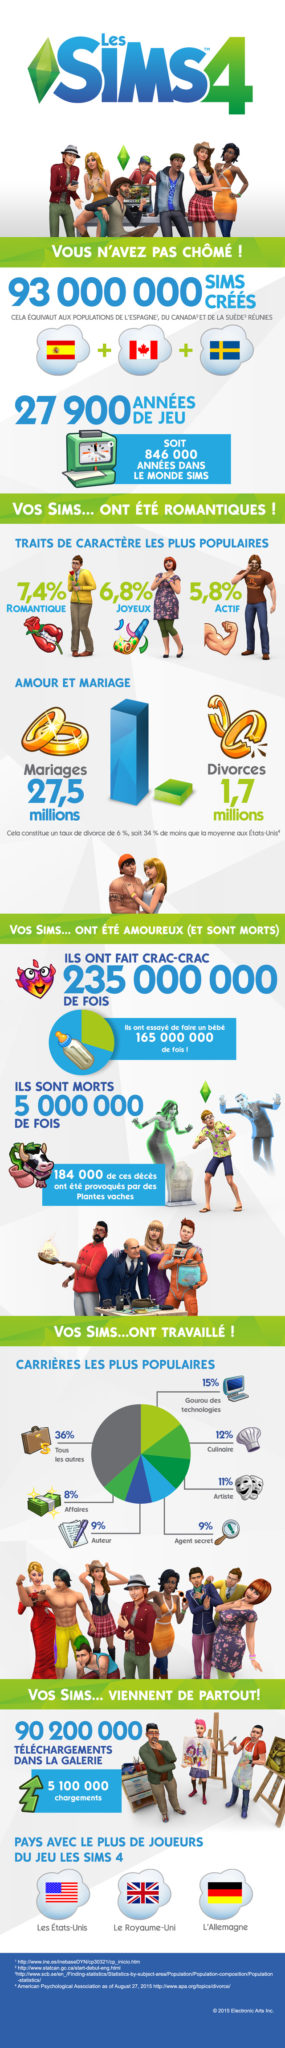 TS4_oneyear_infographic_Final_FR